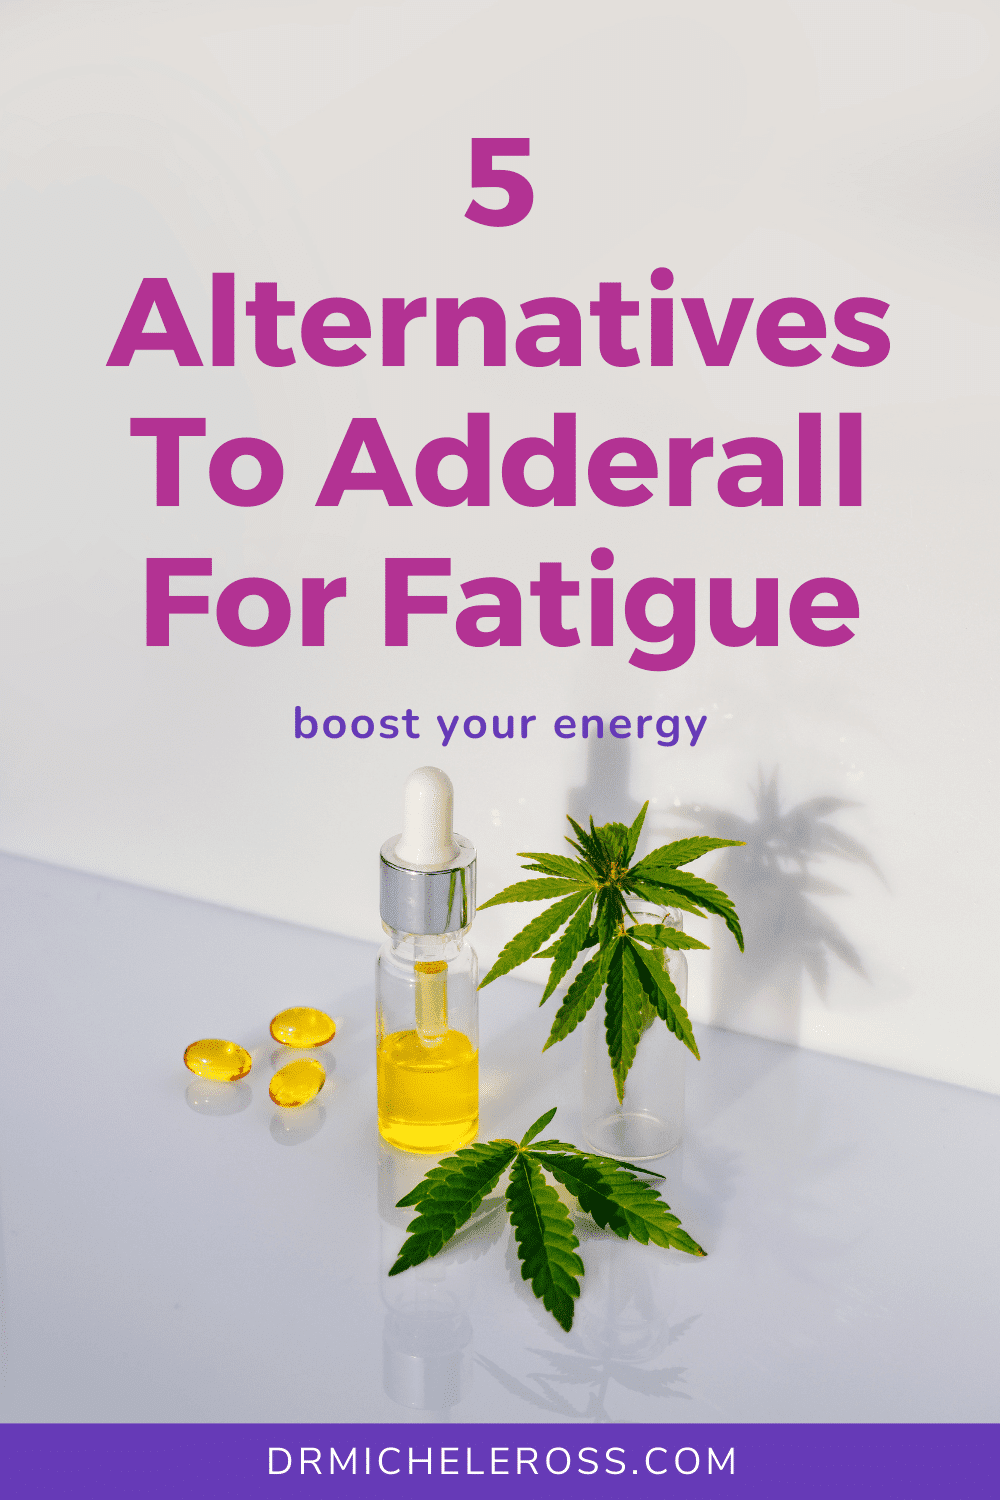 cbd oil can boost energy and fight fatigue